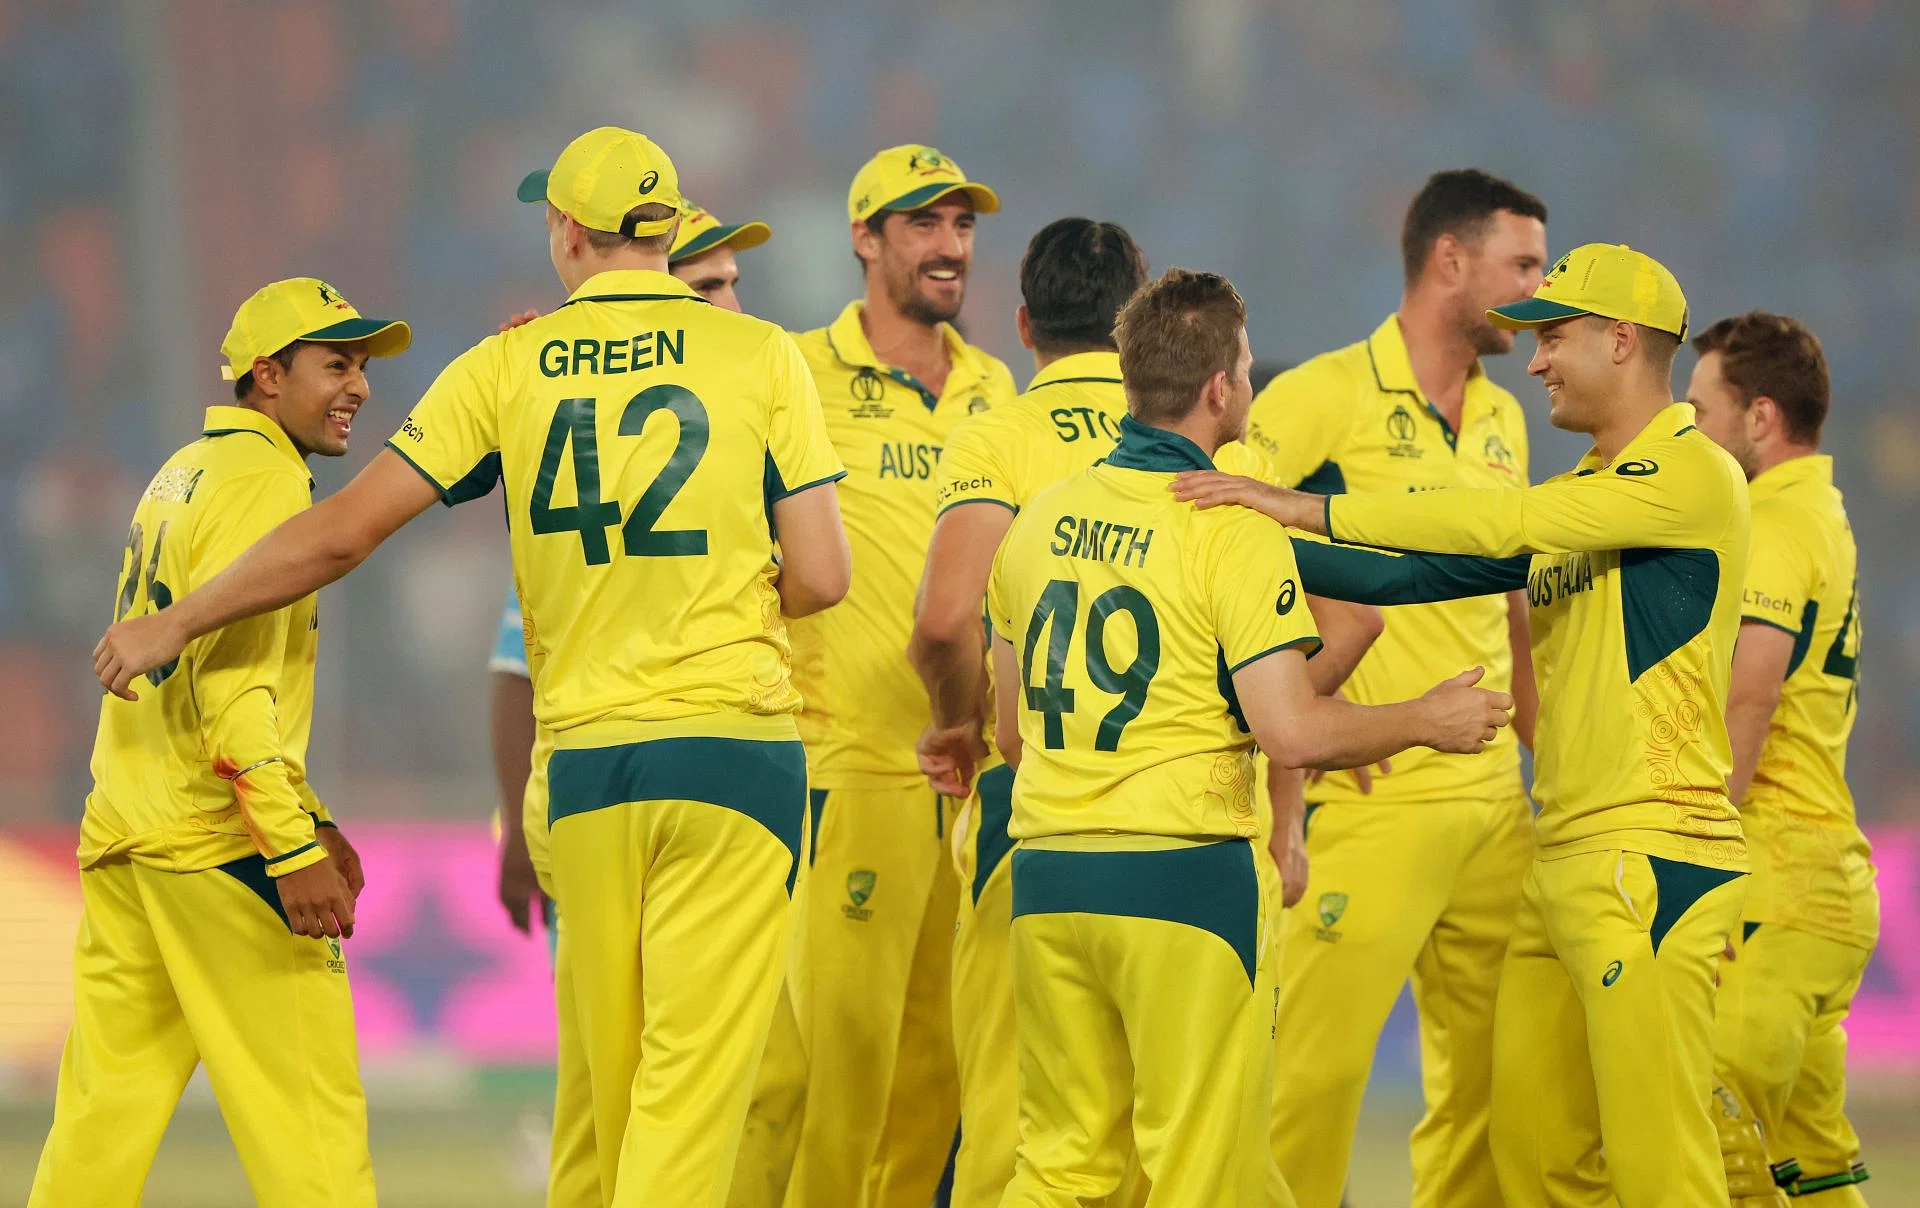 NZ vs Aus 2nd T20I: Fantasy Tips, Predicted XI, Pitch Report